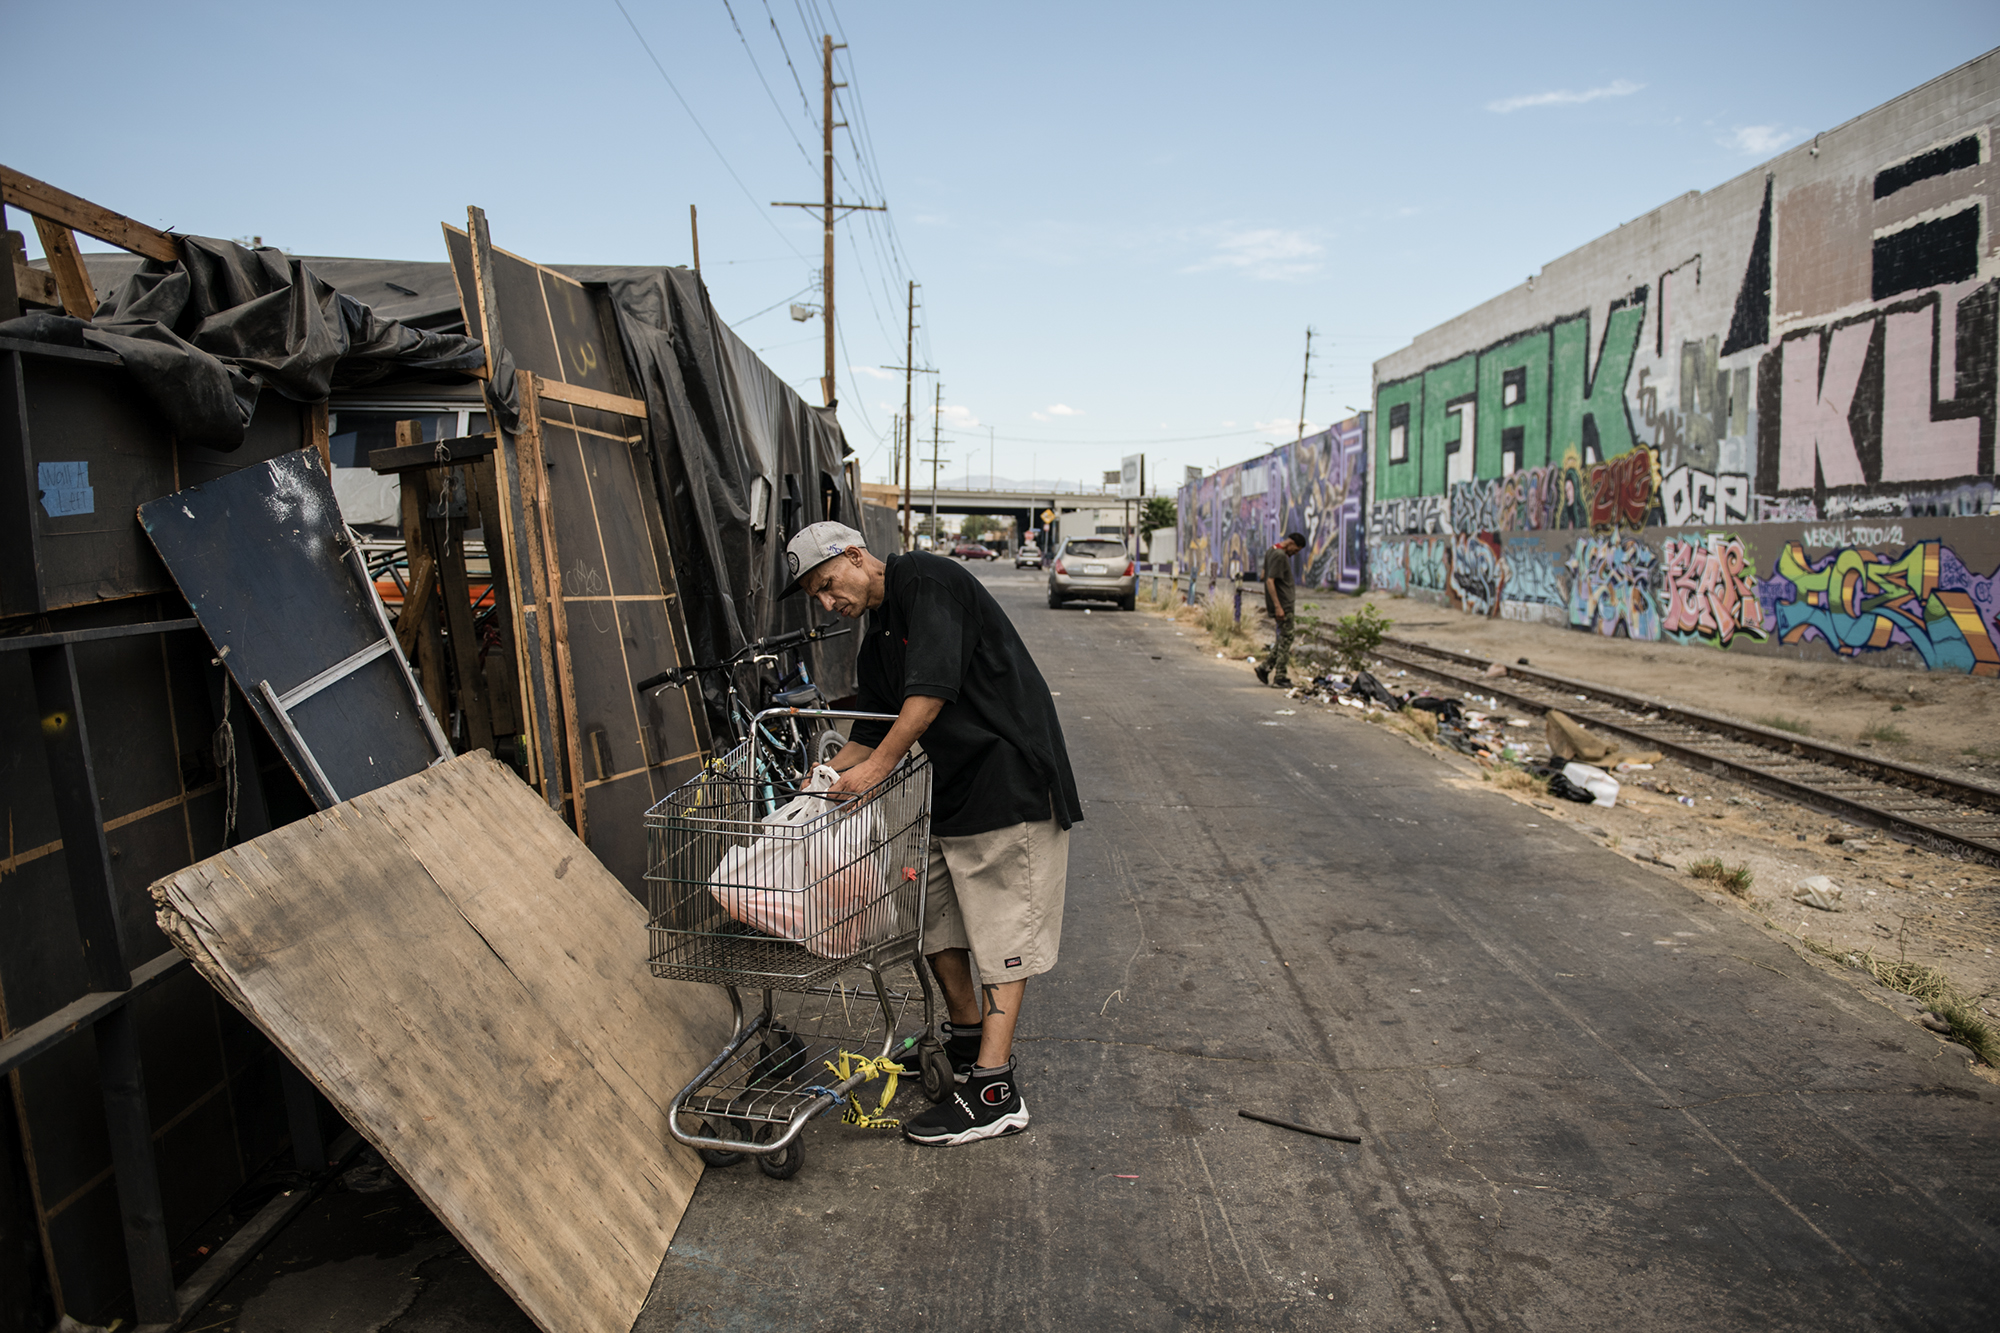 Homelessness slowed in Los Angeles, but it’s little cause for celebration